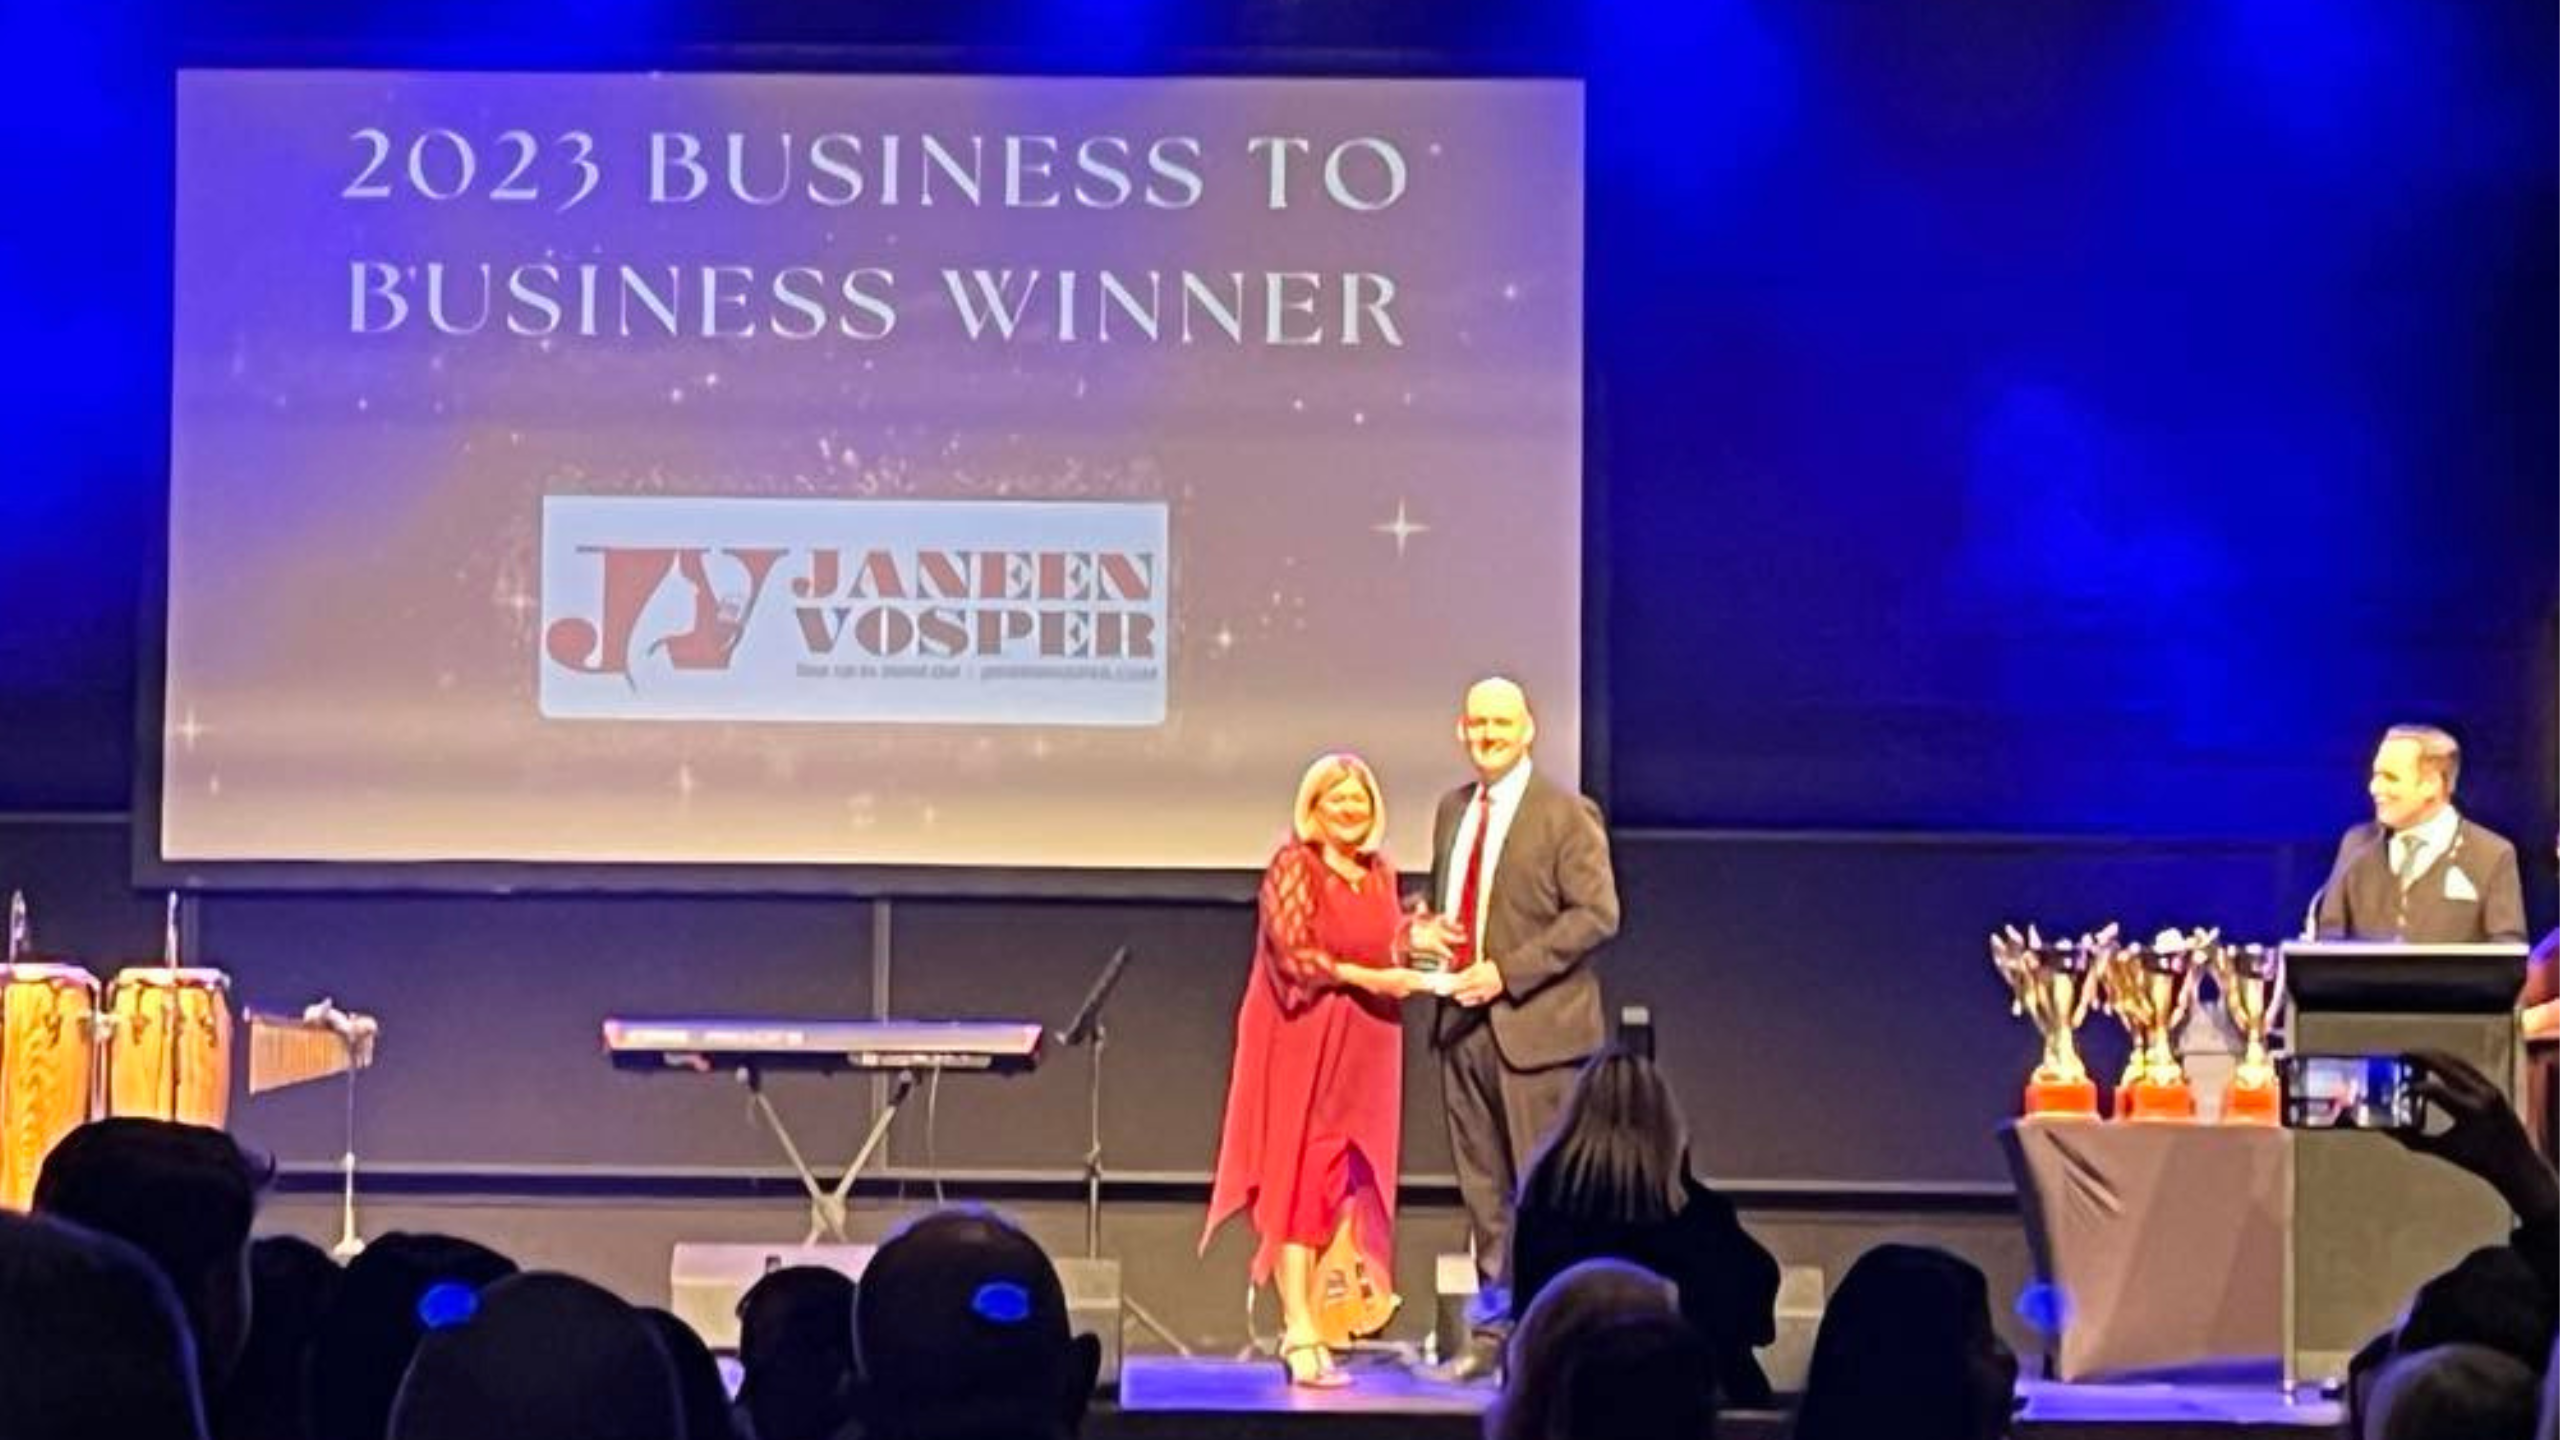 Janeen Vosper collecting an award for Logan small business of the year business to business catagory 2023